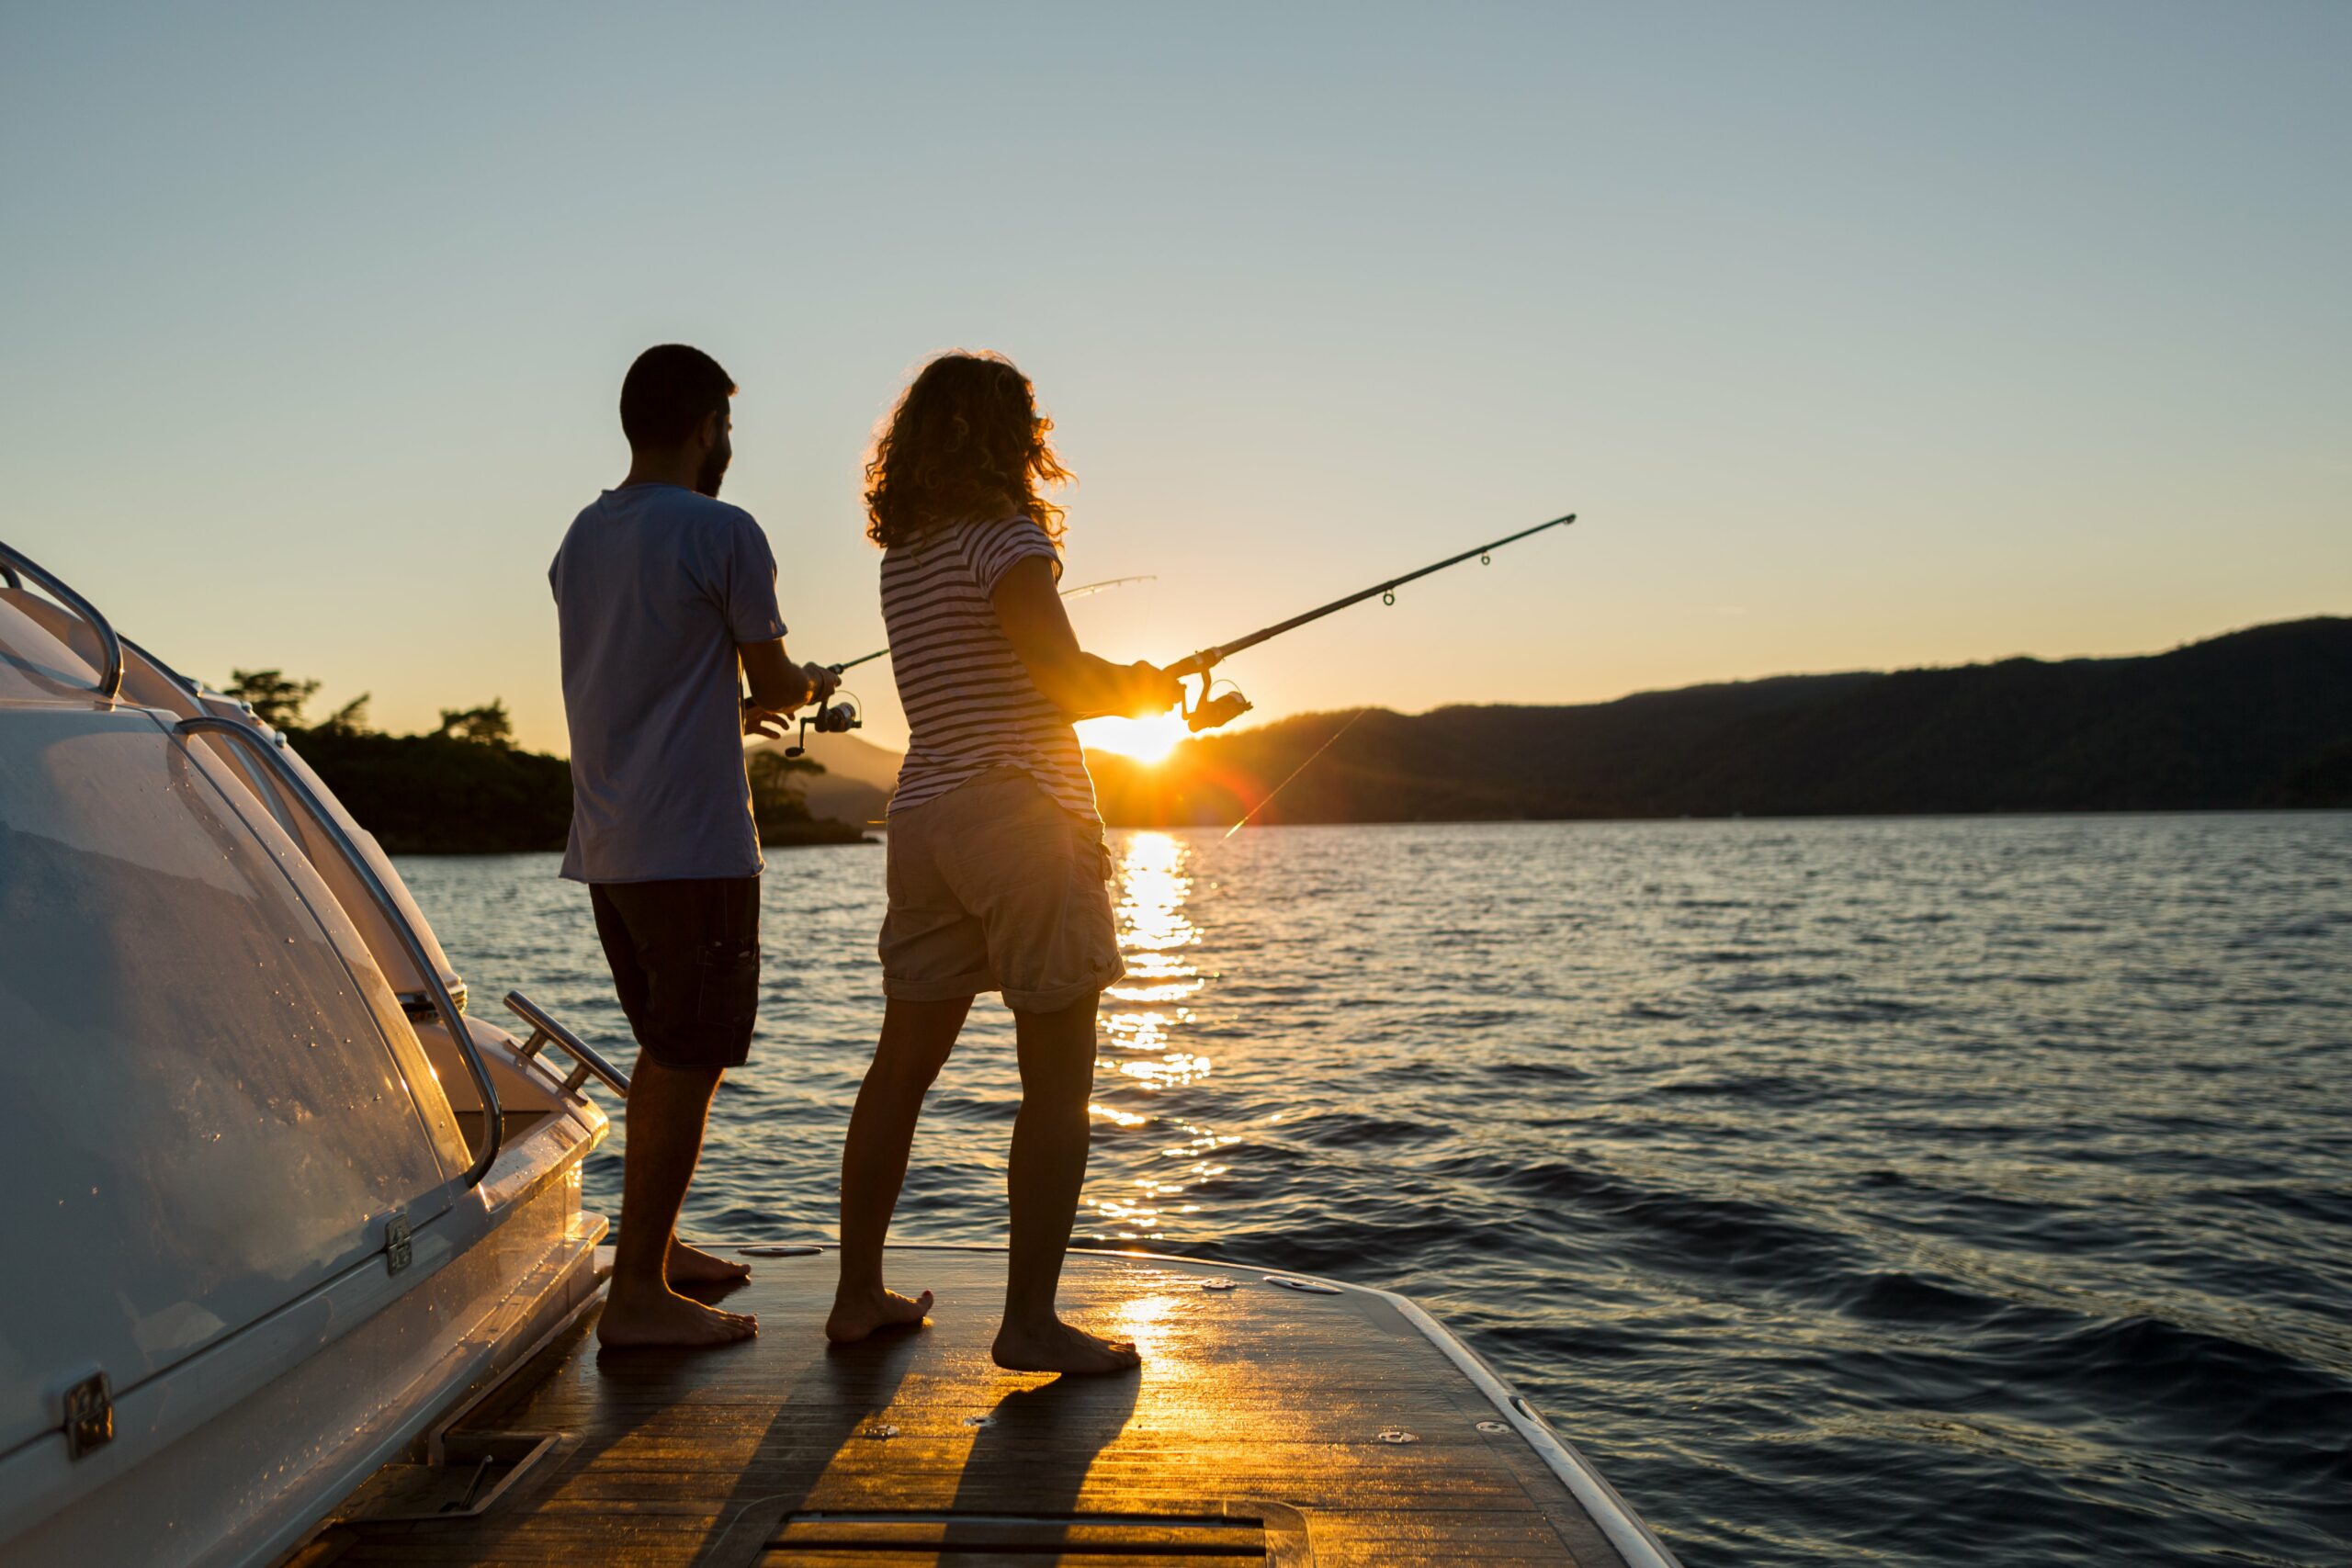 Two people fishing off the edge of a boat during the sunset